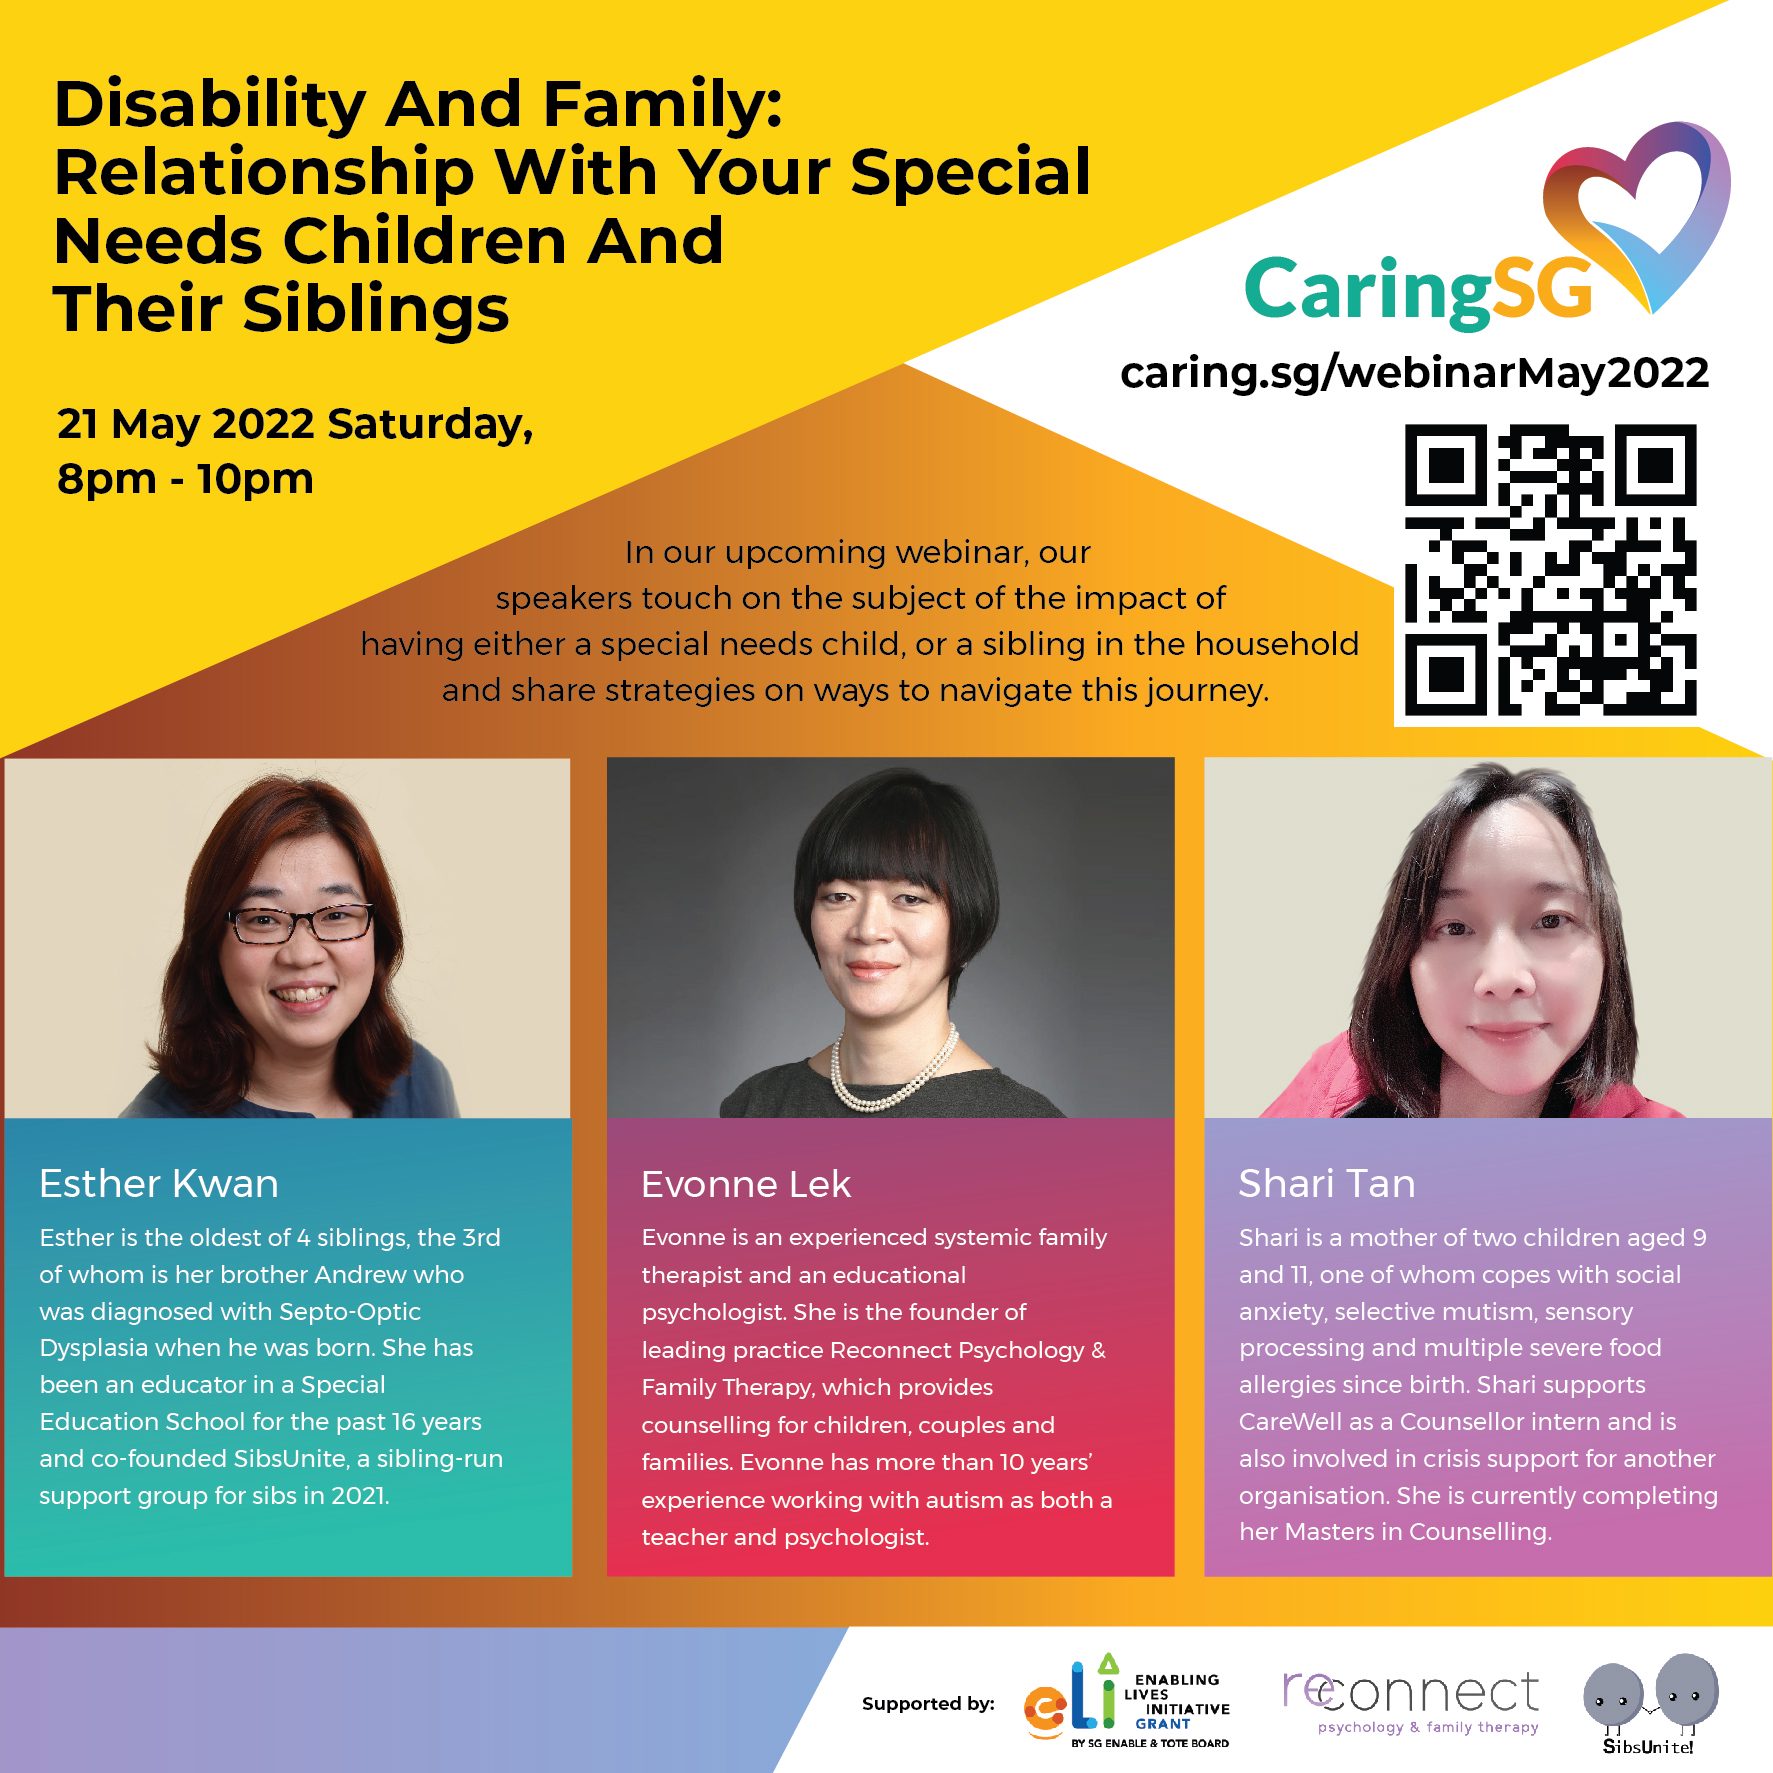 Disability And Family: Relationship With Your Special Needs Children And Their Siblings